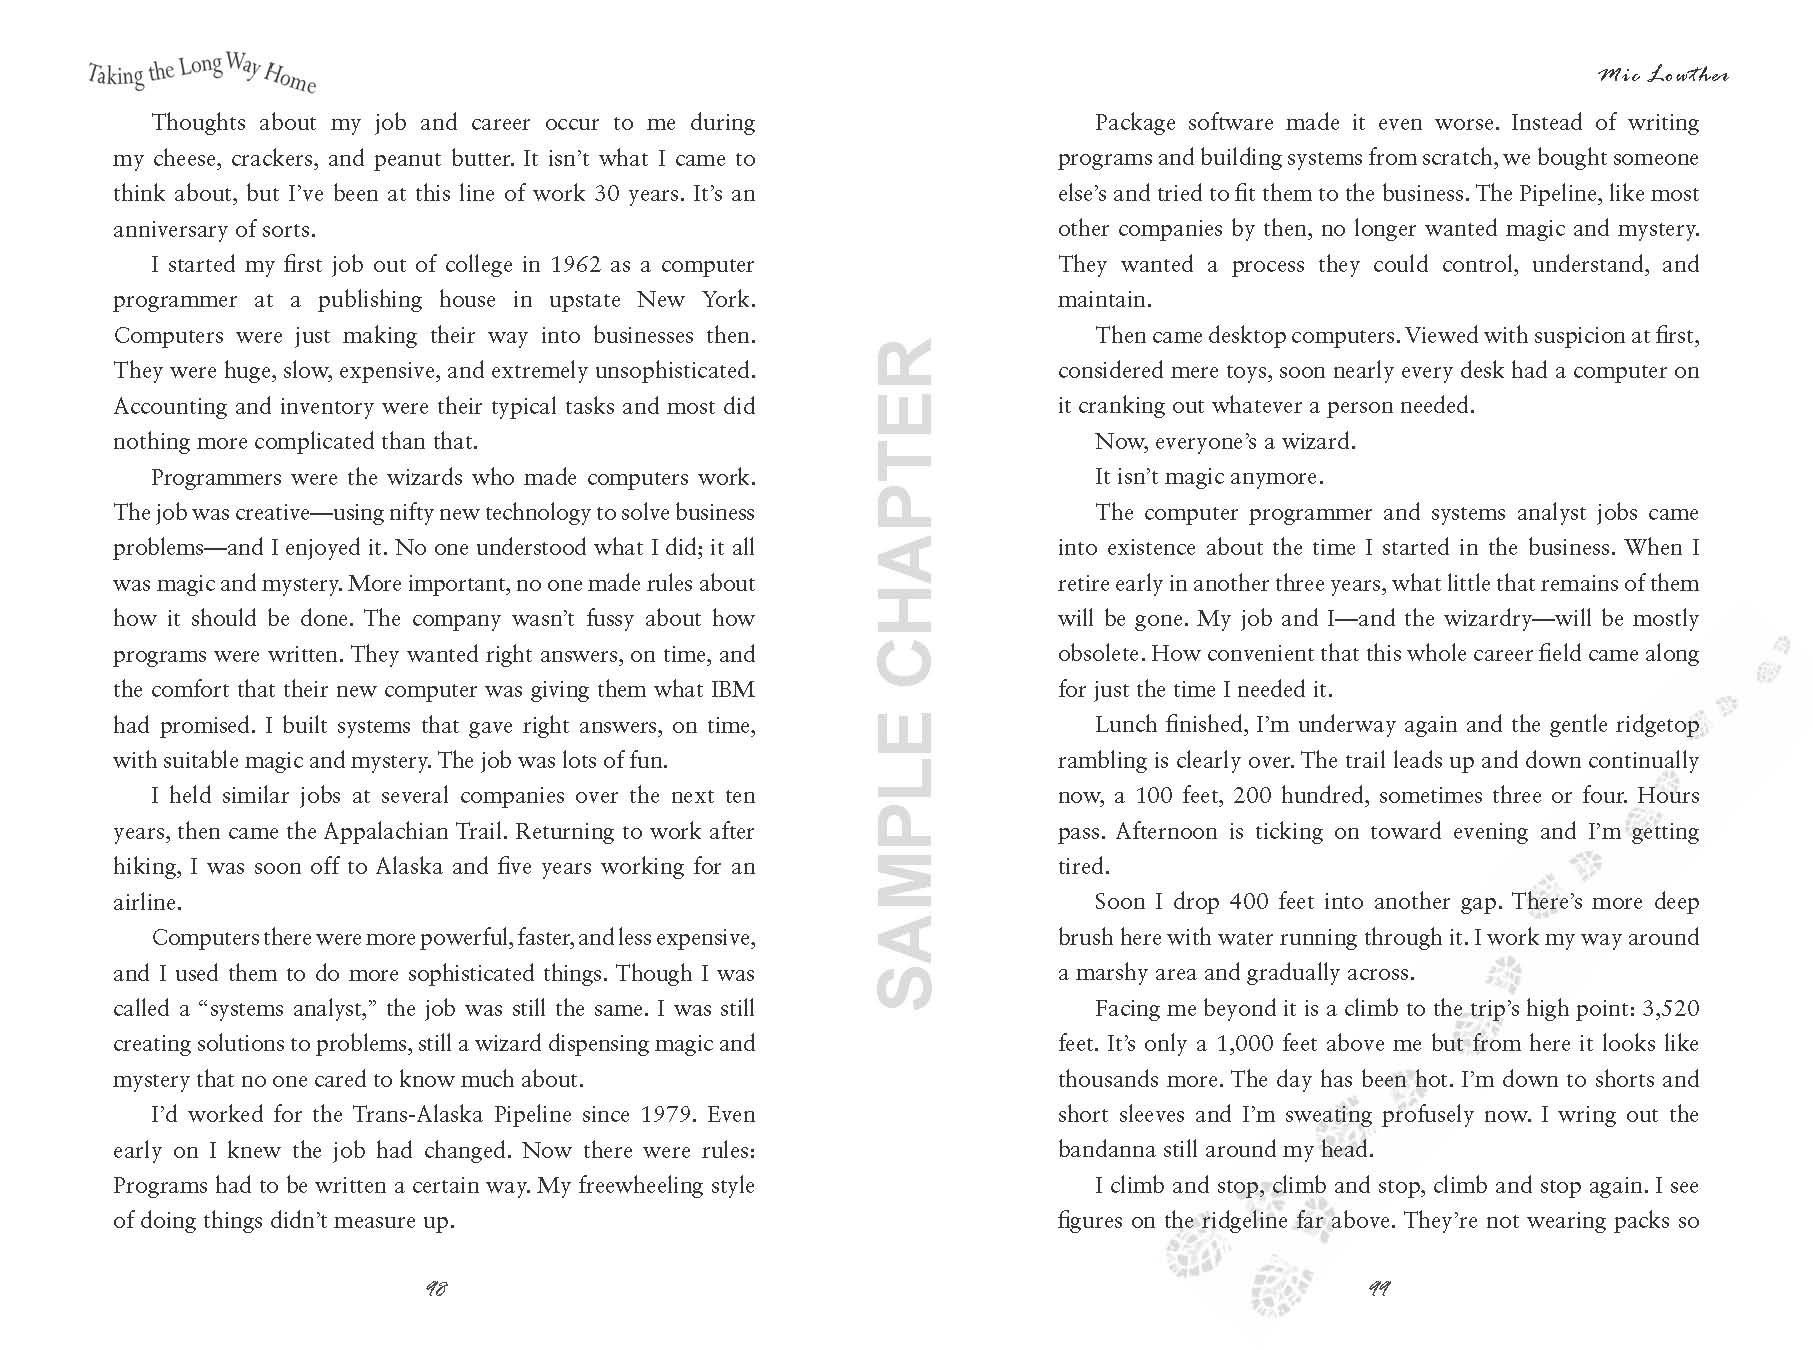 Taking The Long Way Home sample chapter pg 9 & 10